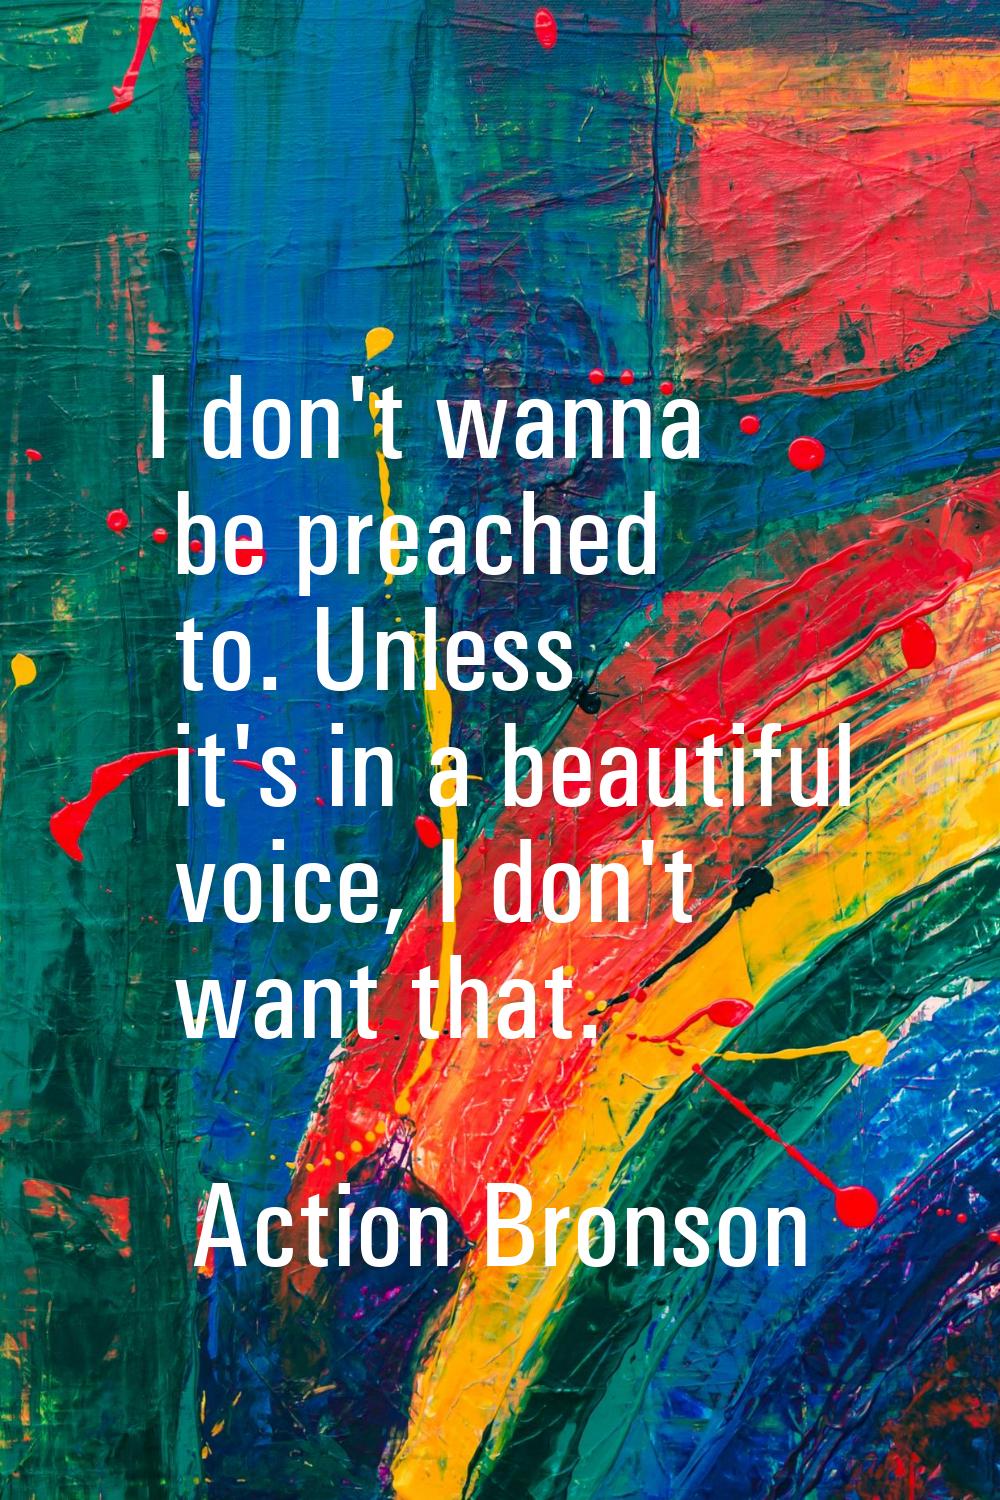 I don't wanna be preached to. Unless it's in a beautiful voice, I don't want that.